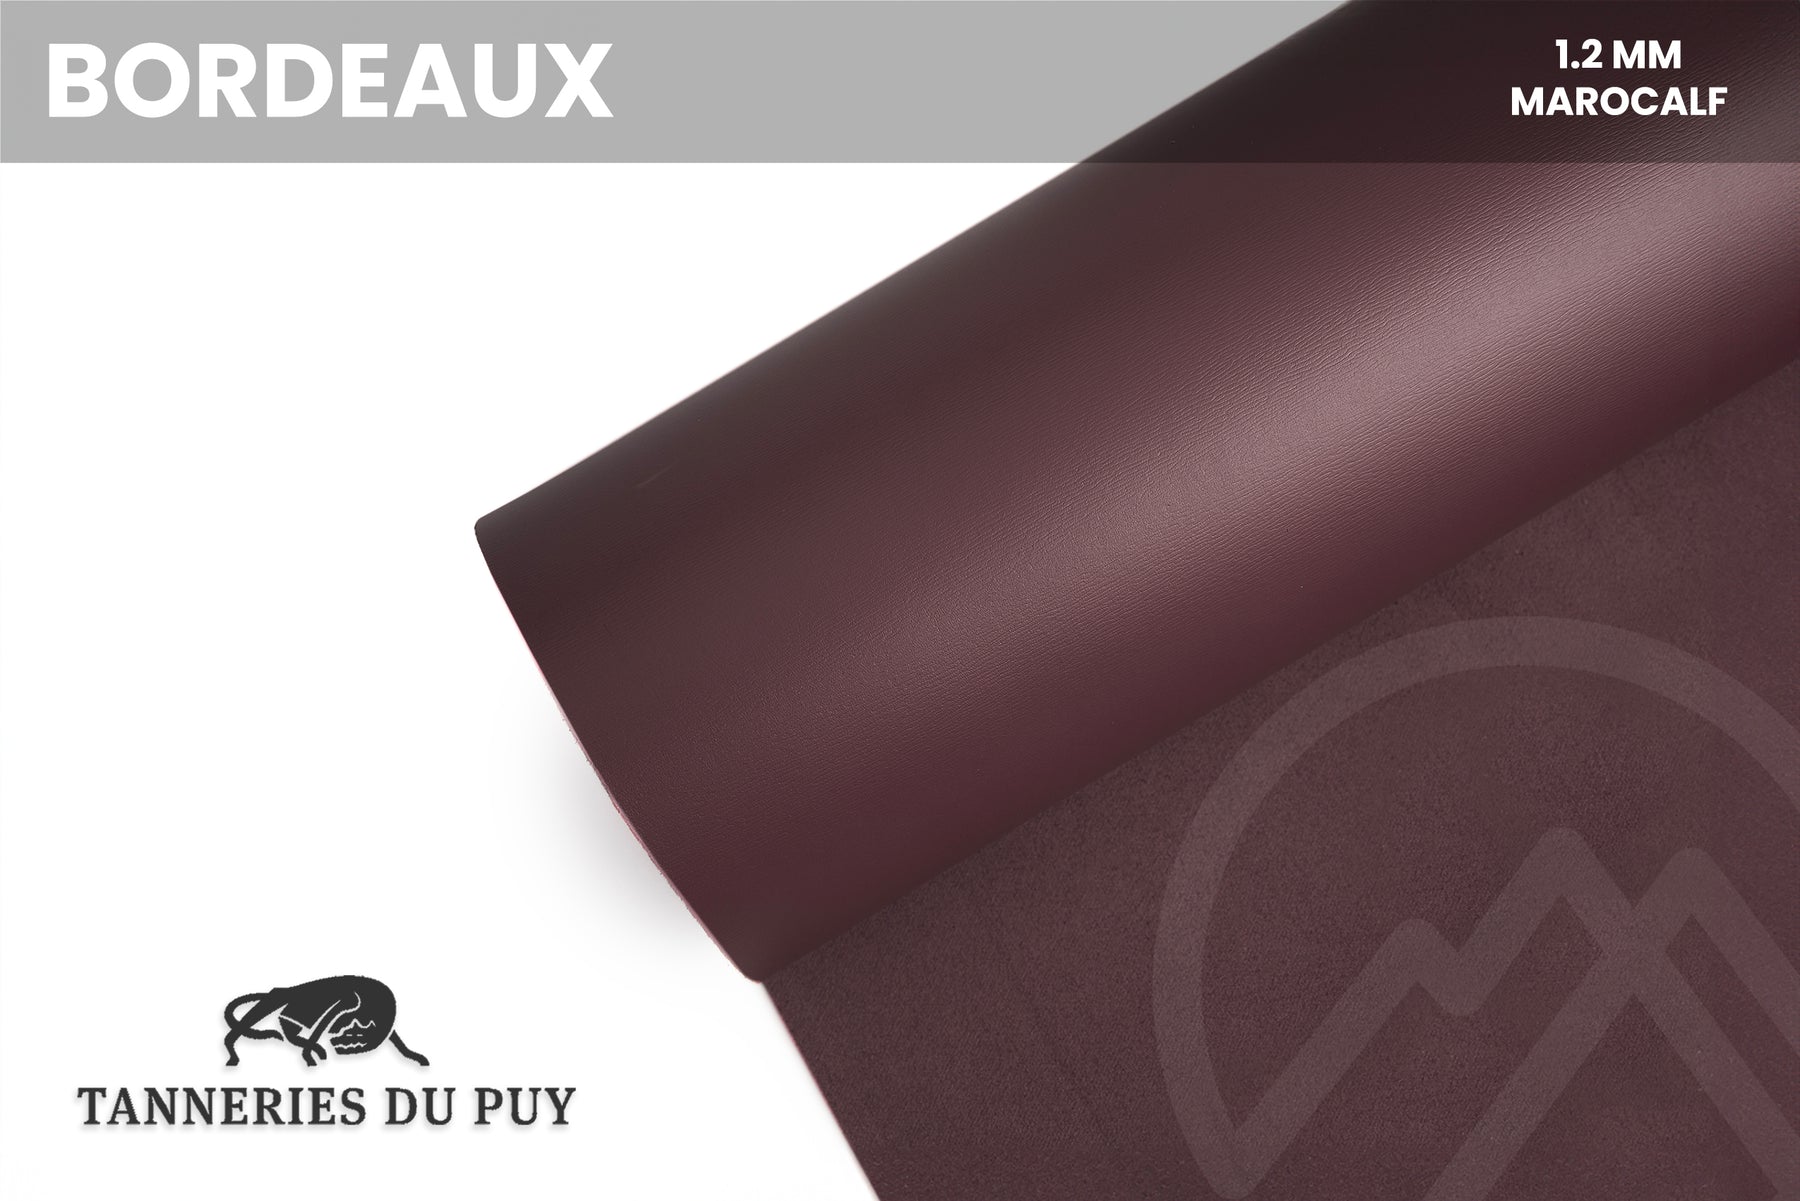 Tanneries Du Puy 🇫🇷 - Marocalf - Luxury Box Calf Leather (SAMPLES)